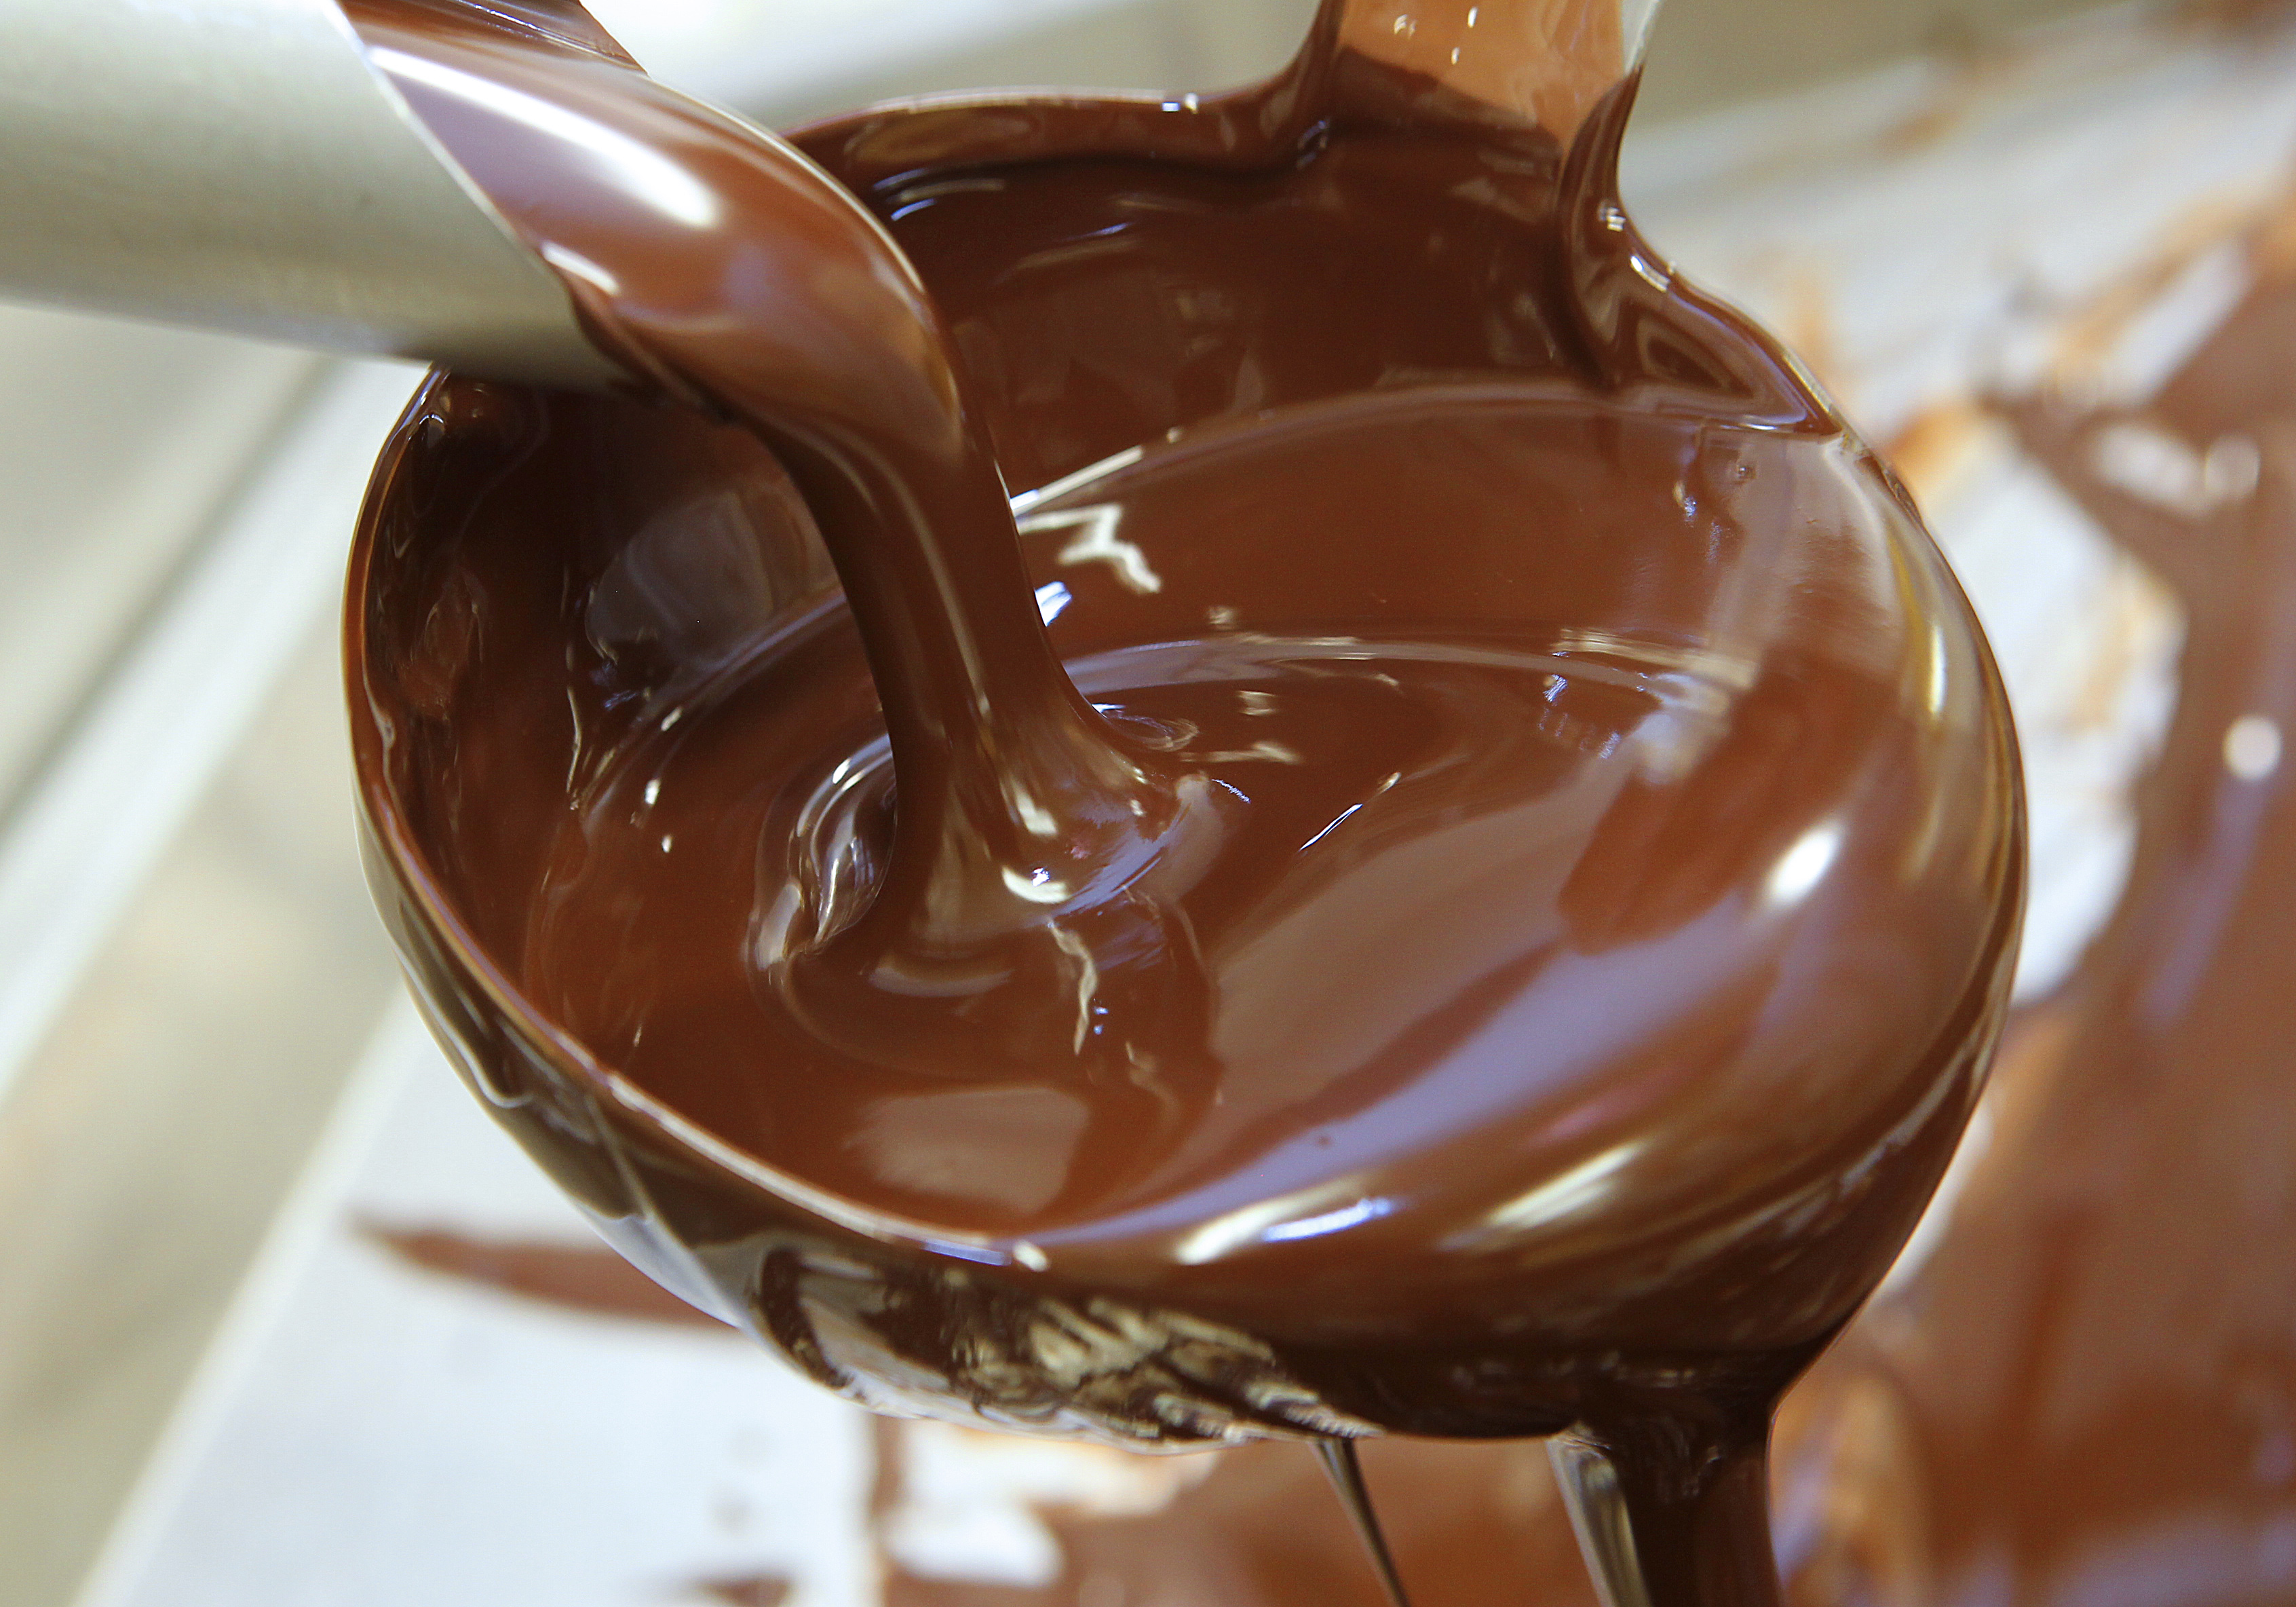 Melted chocolate is poured on October 28